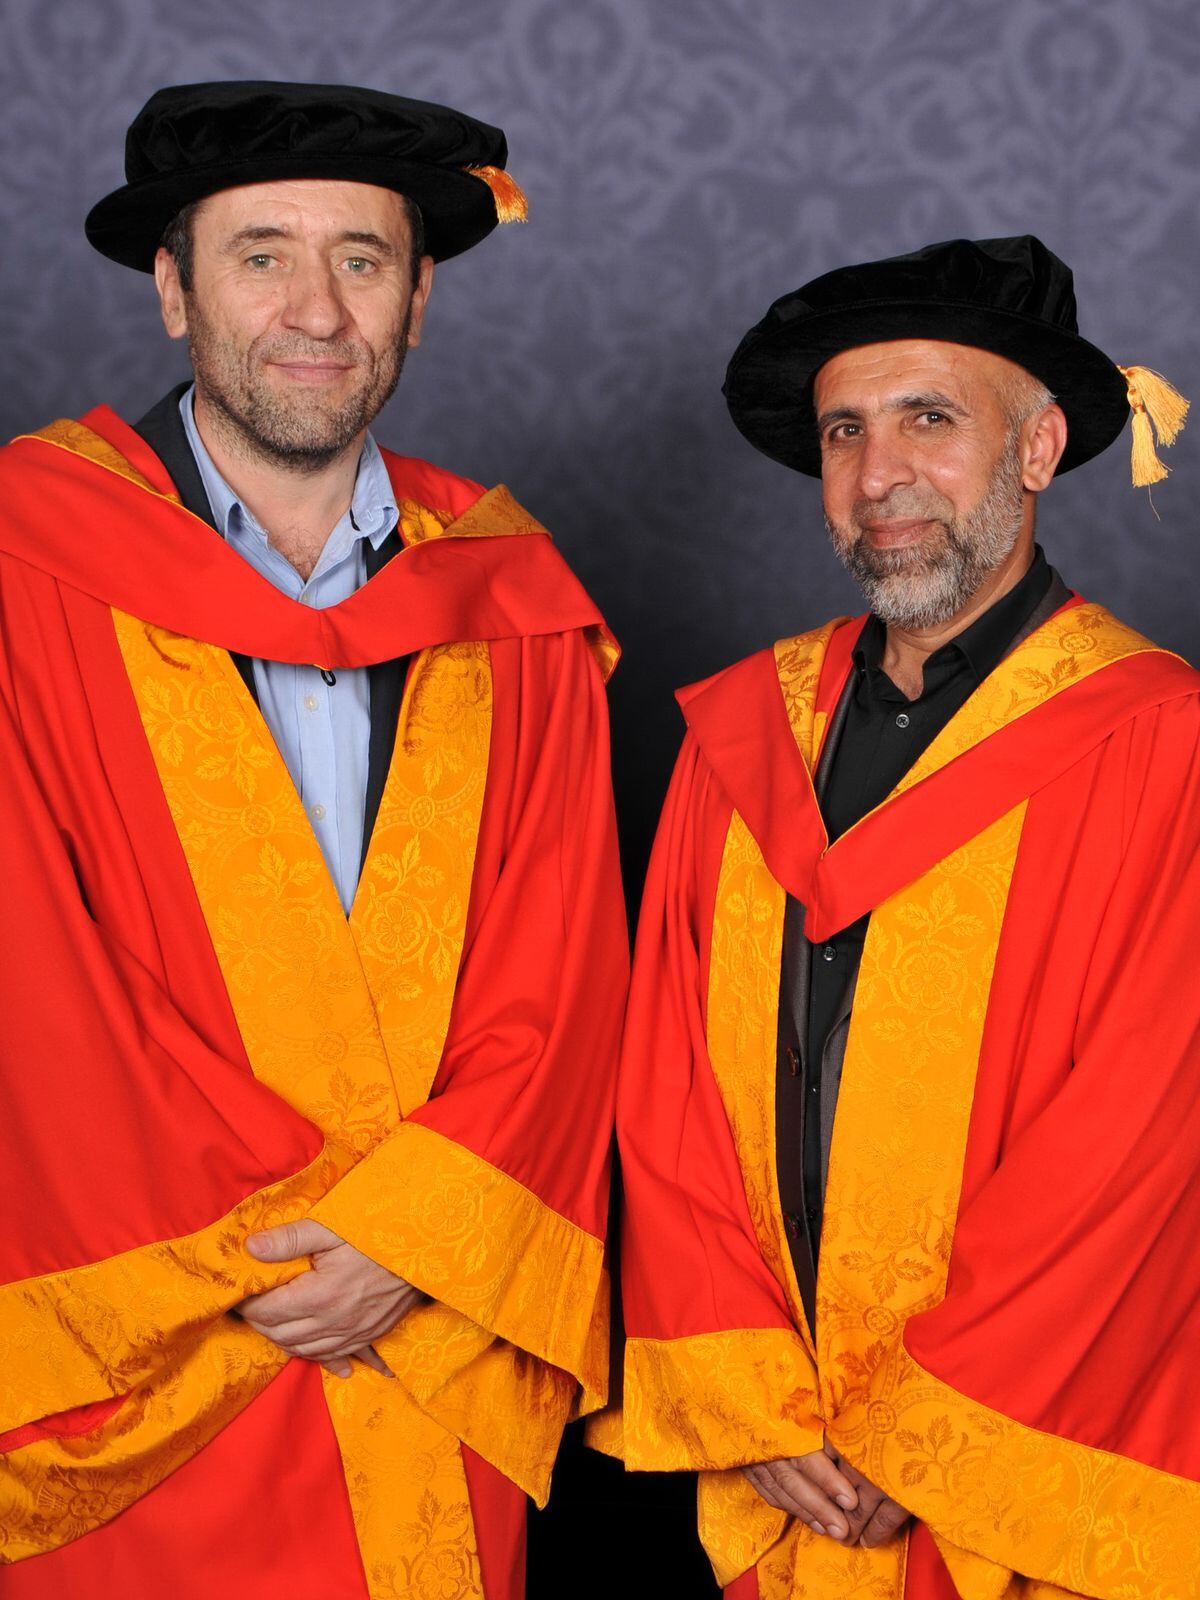 Arten and Mohammed have been awarded honorary degrees for their community initiative